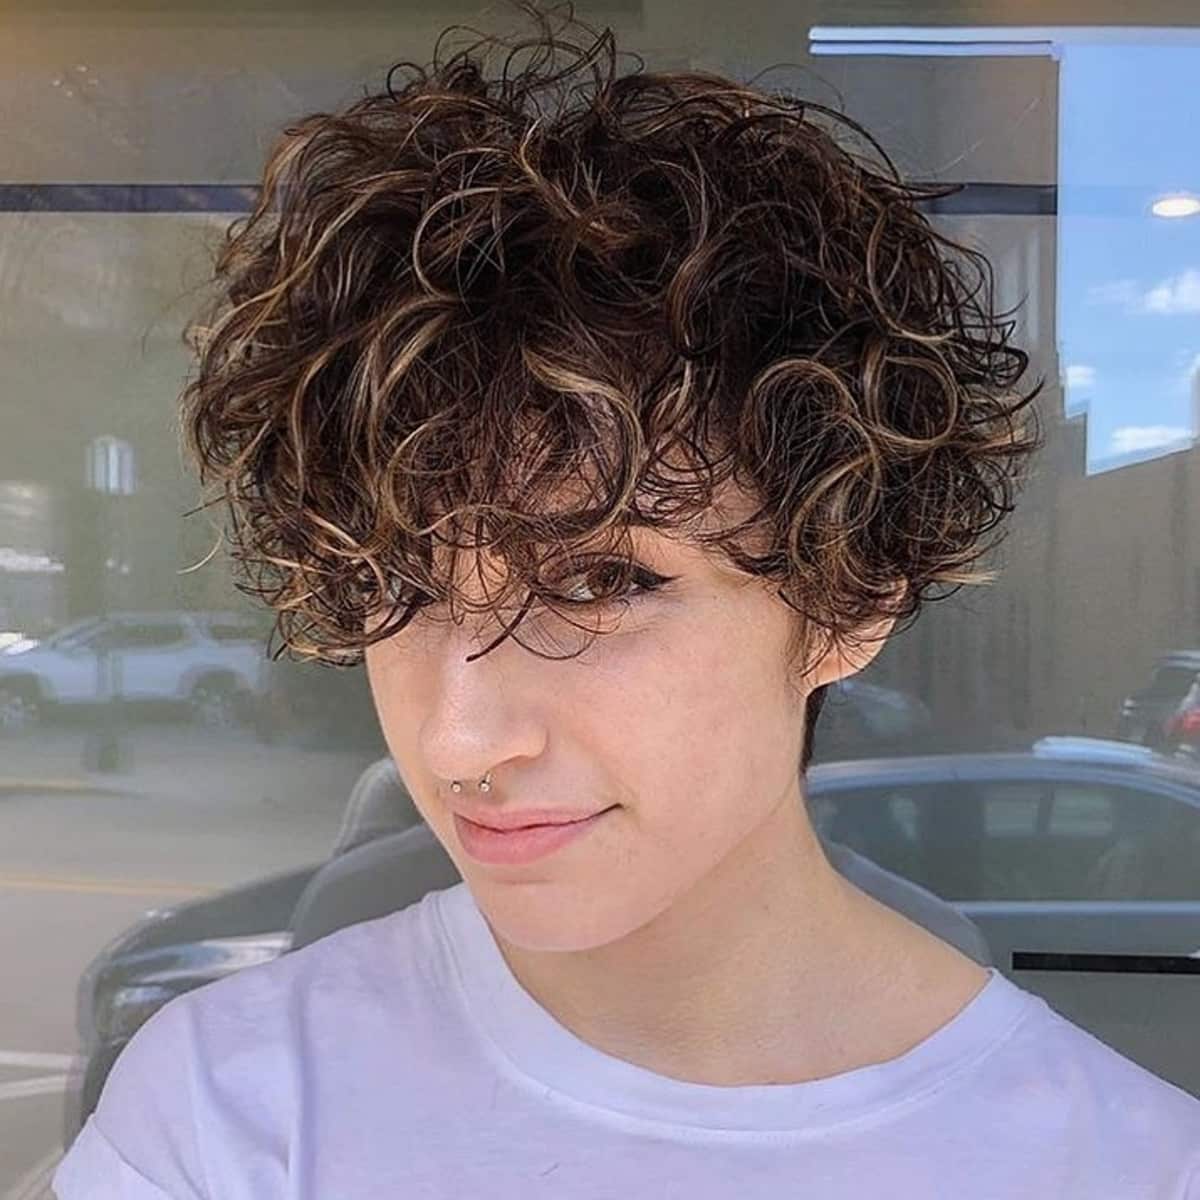 Curly bowl hairstyle